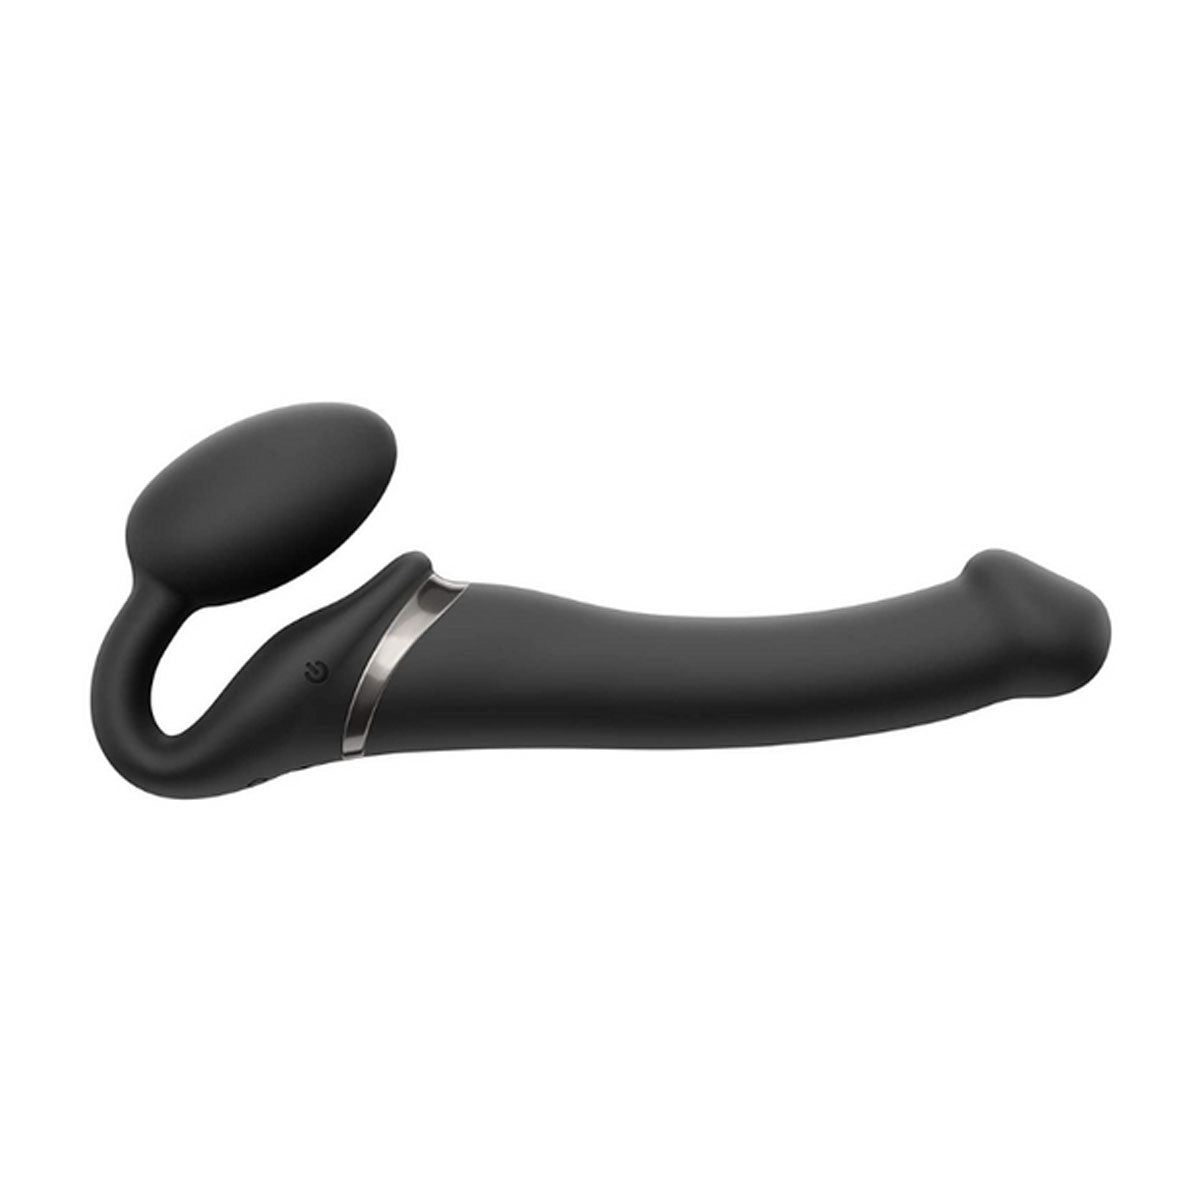 Black silicone bendable strap-on with bulb for internal stimulation Nudie Co